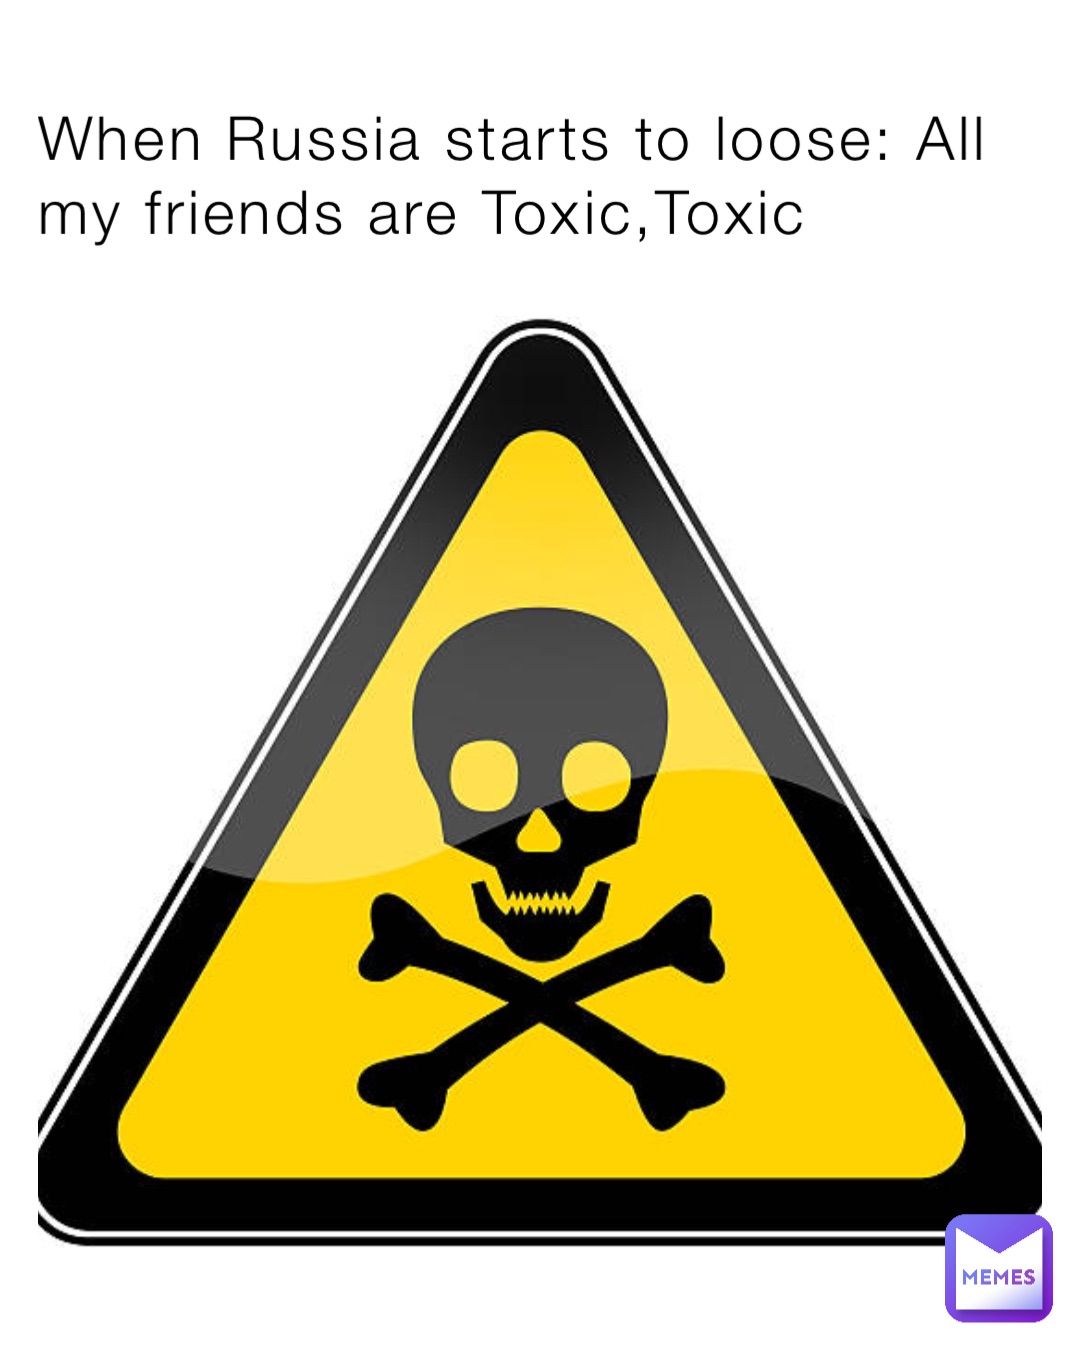 When Russia starts to loose: All my friends are Toxic,Toxic